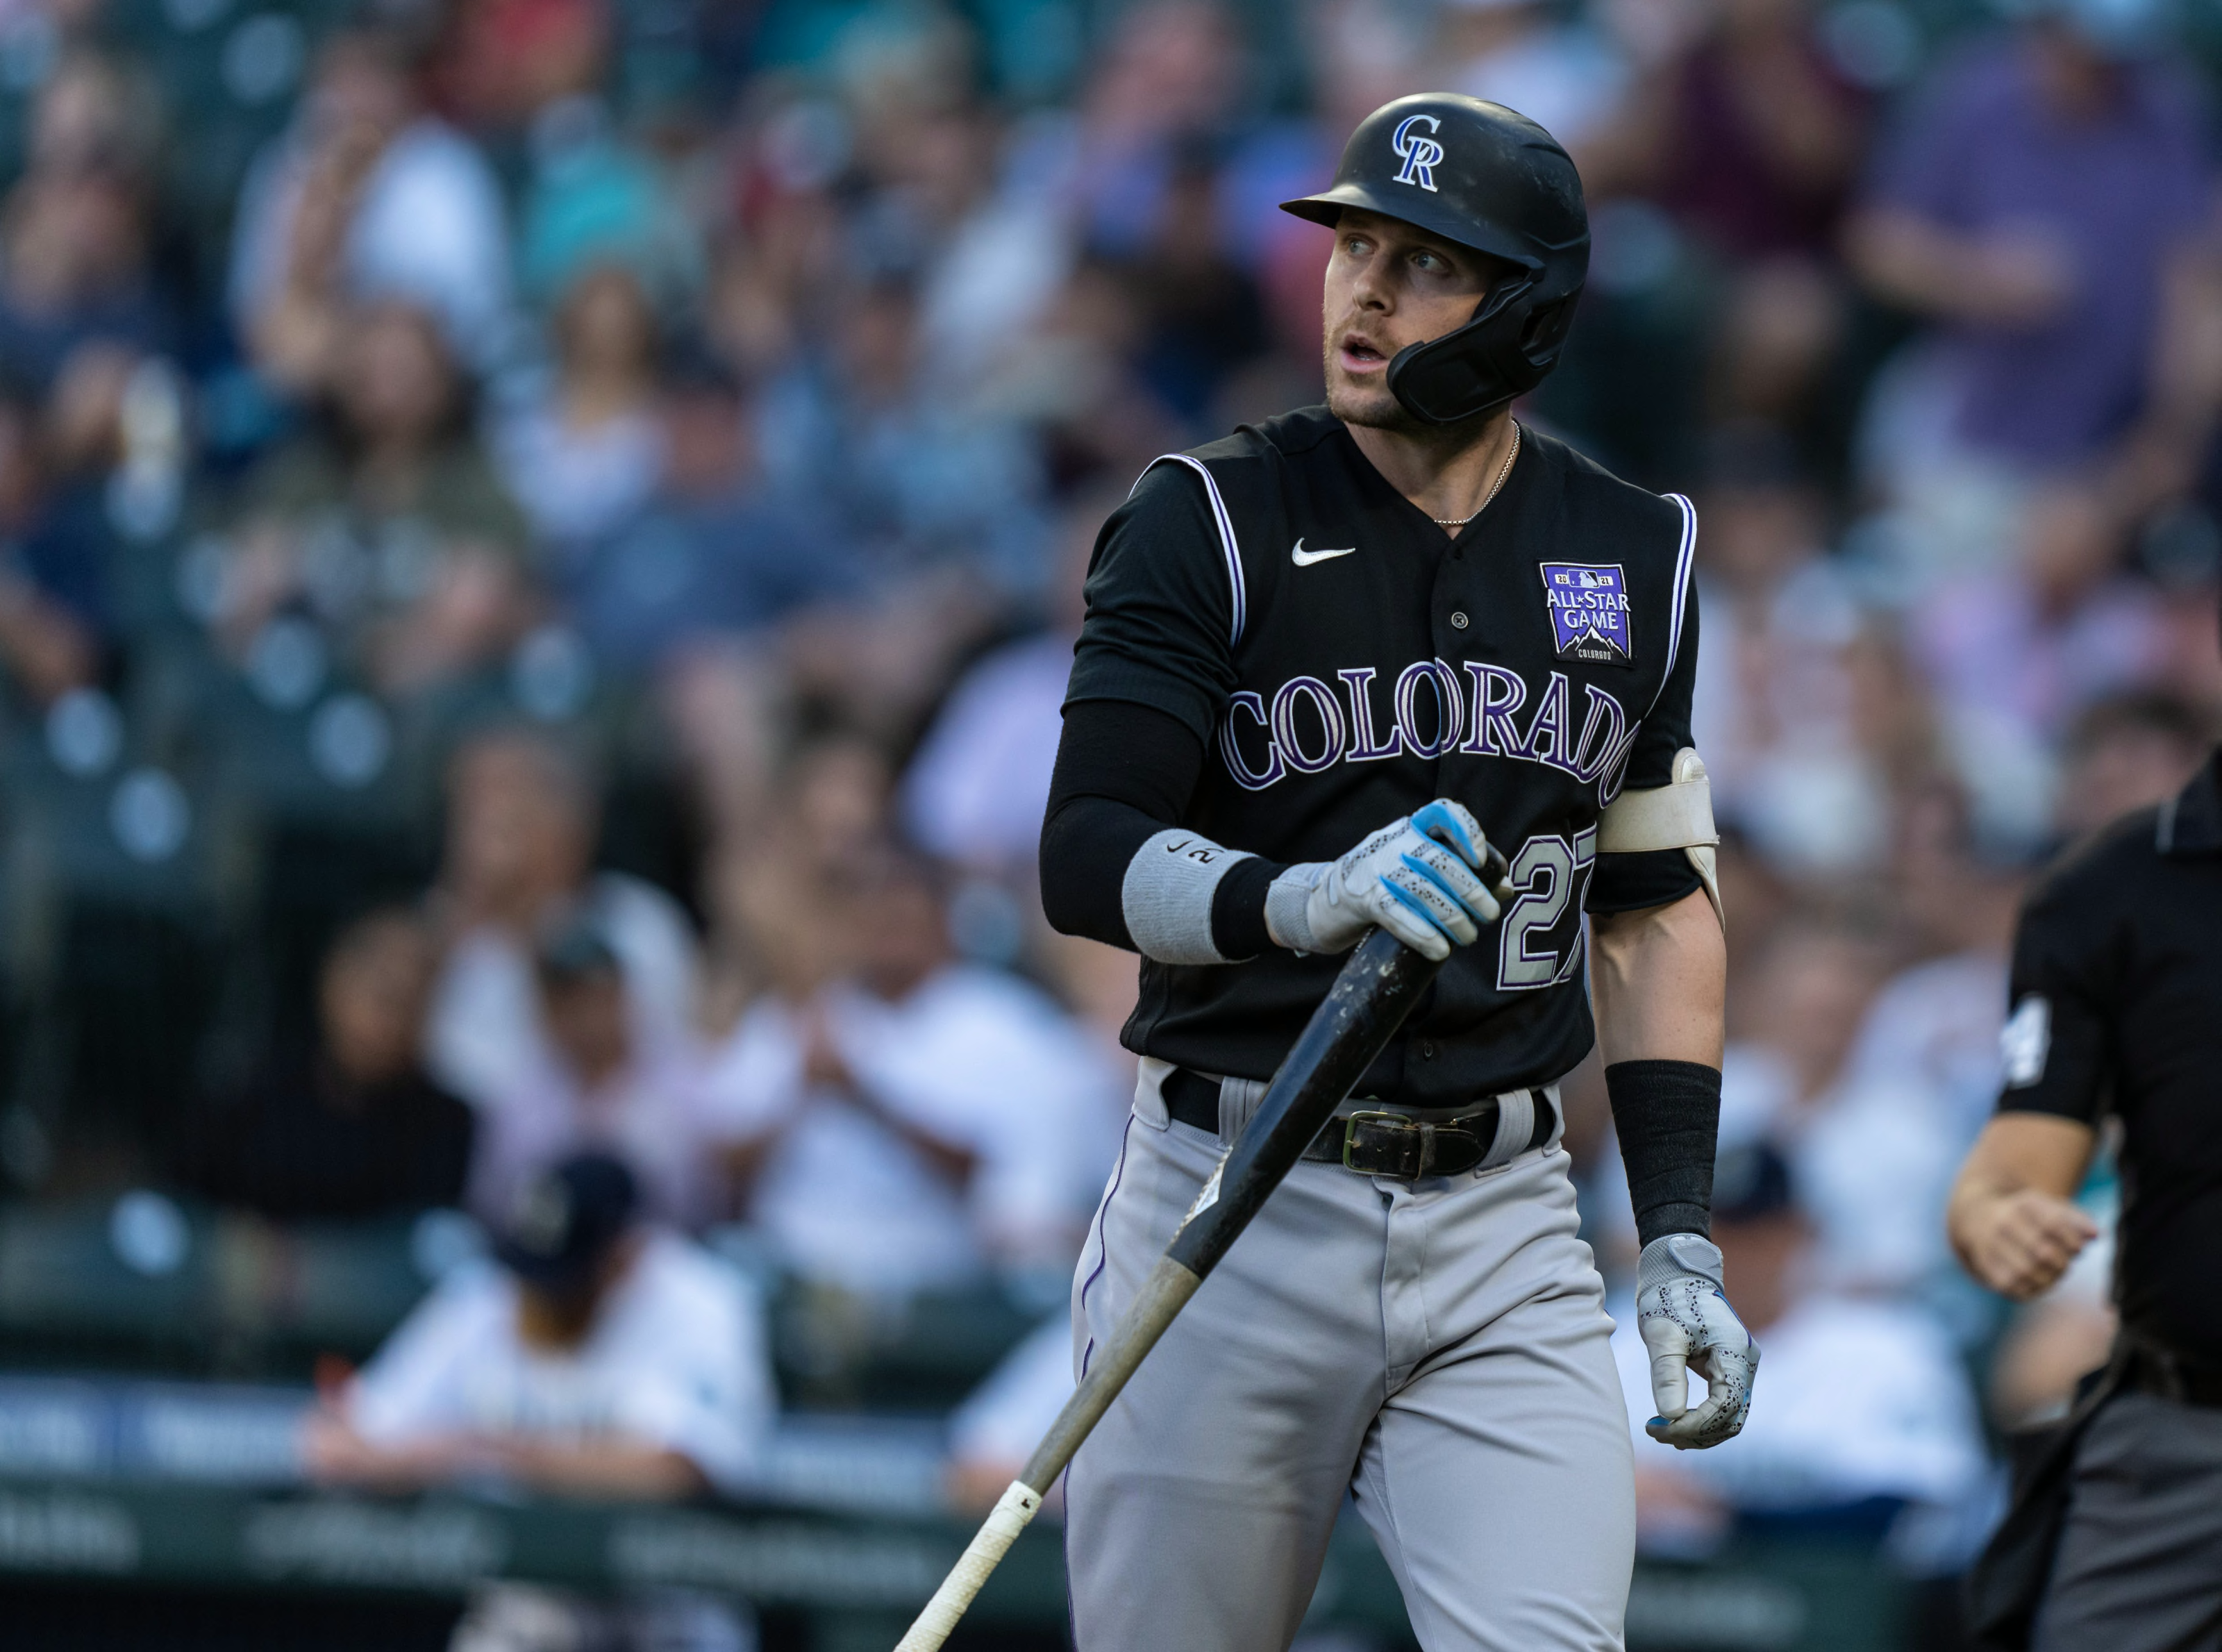 Colorado Rockies shortstop Trevor Story could soon join the New York Yankees